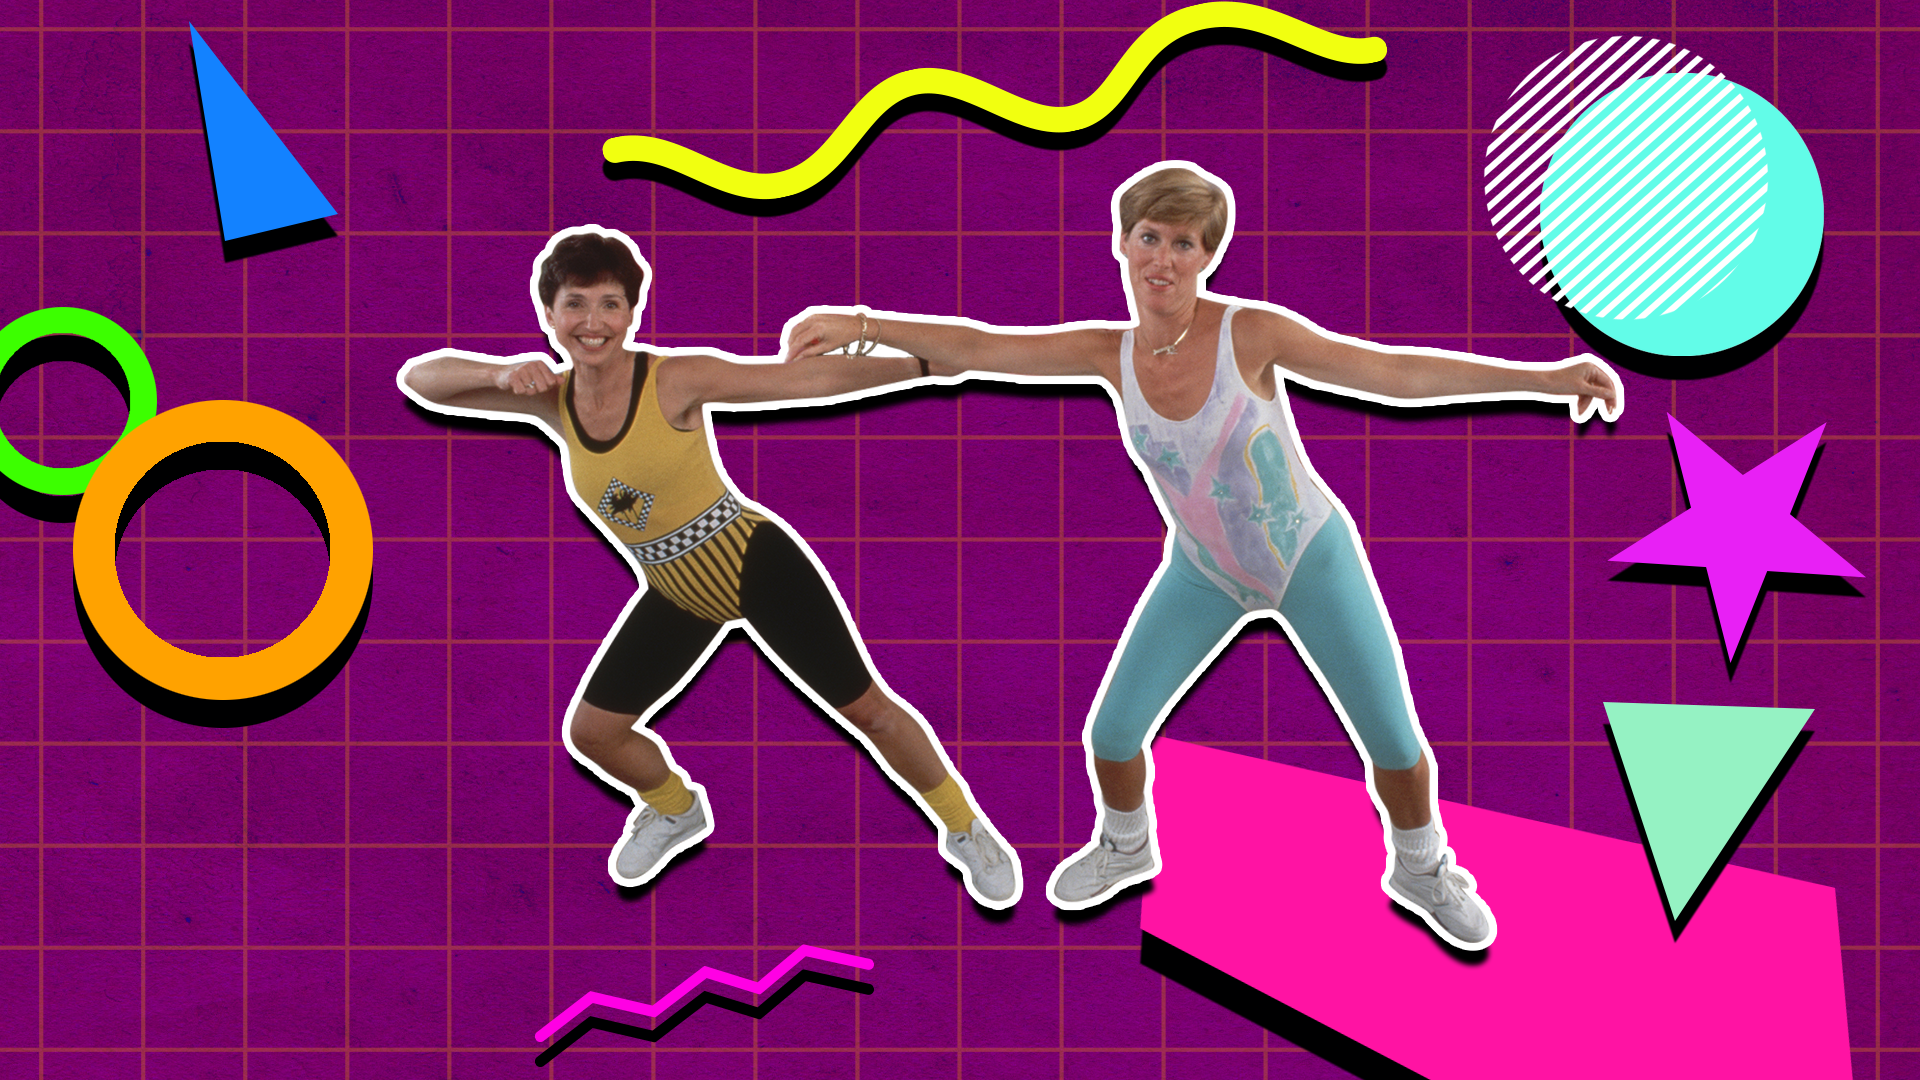 Exercise videos in the 80s were next level. This was Jazzercise